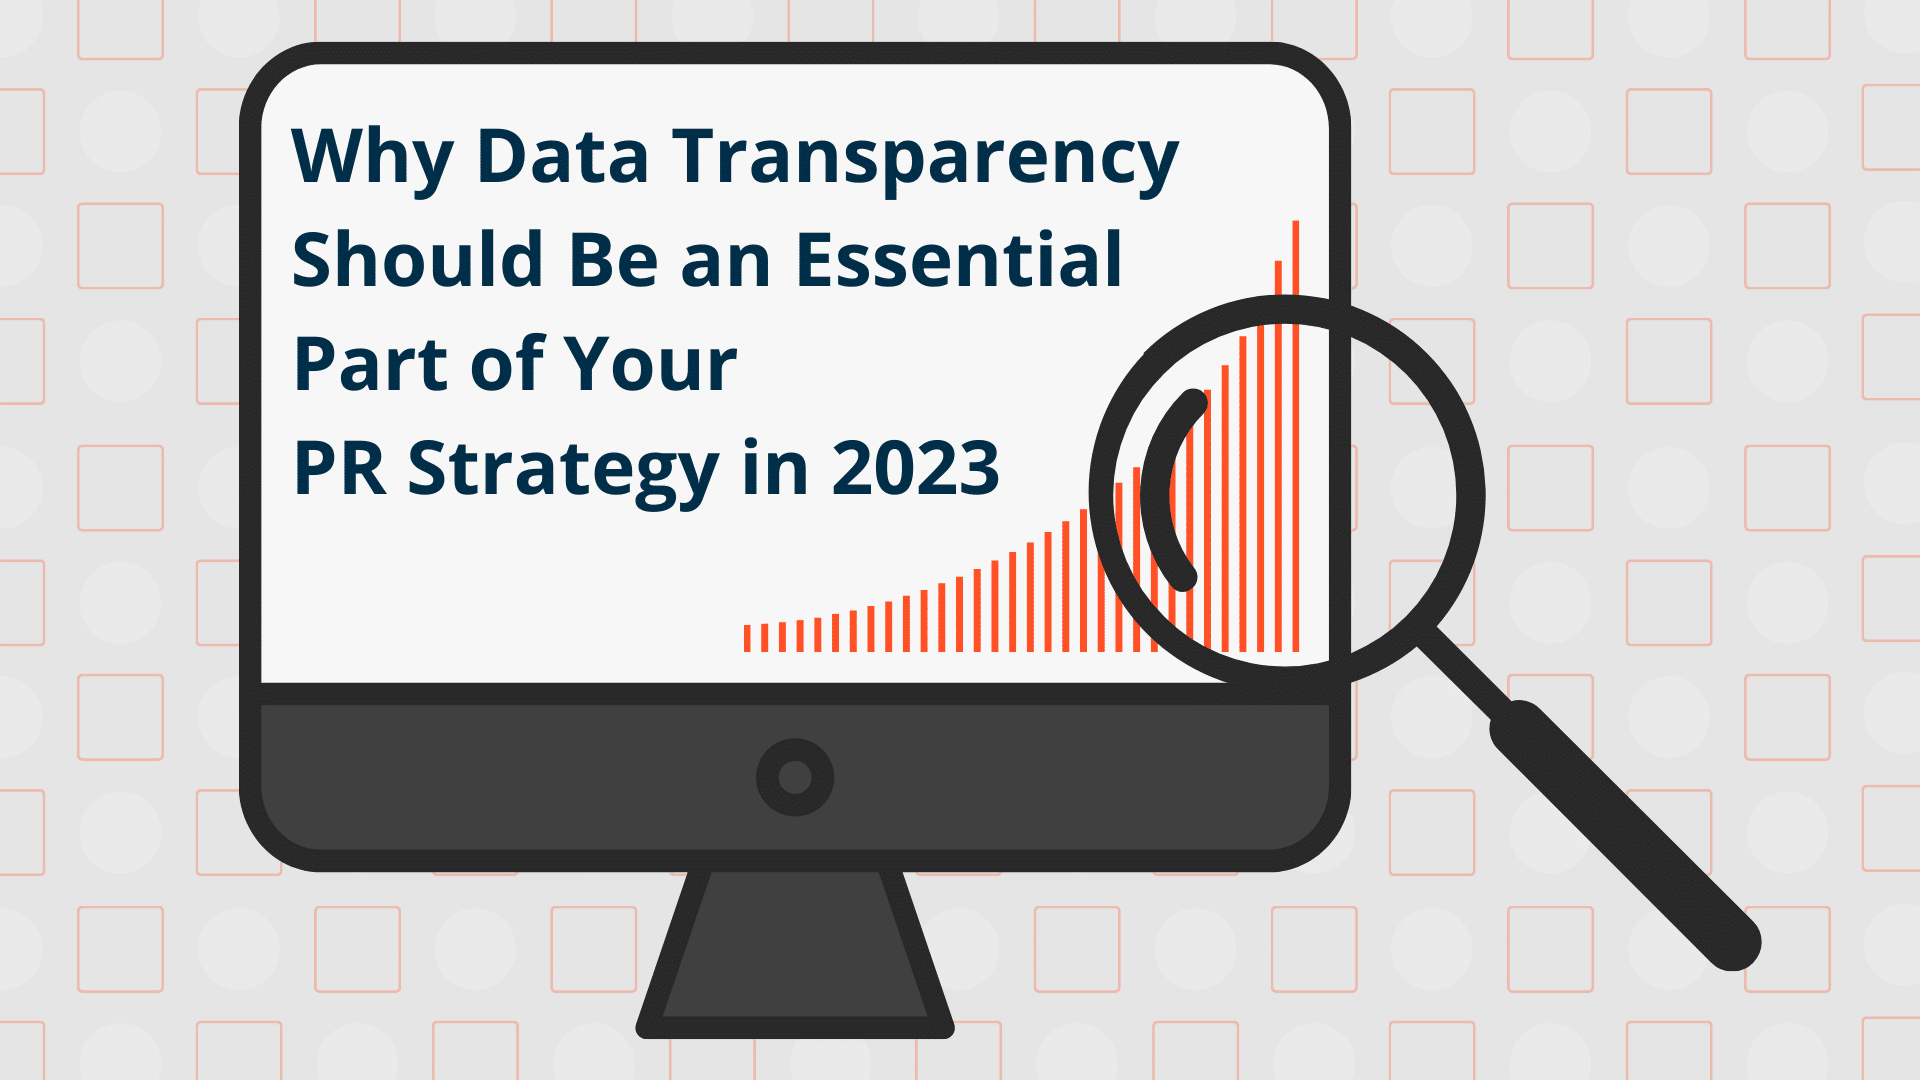 Why Data Transparency Should Be an Essential Part of Your PR Strategy in 2023: 4 Best Practices to Follow 